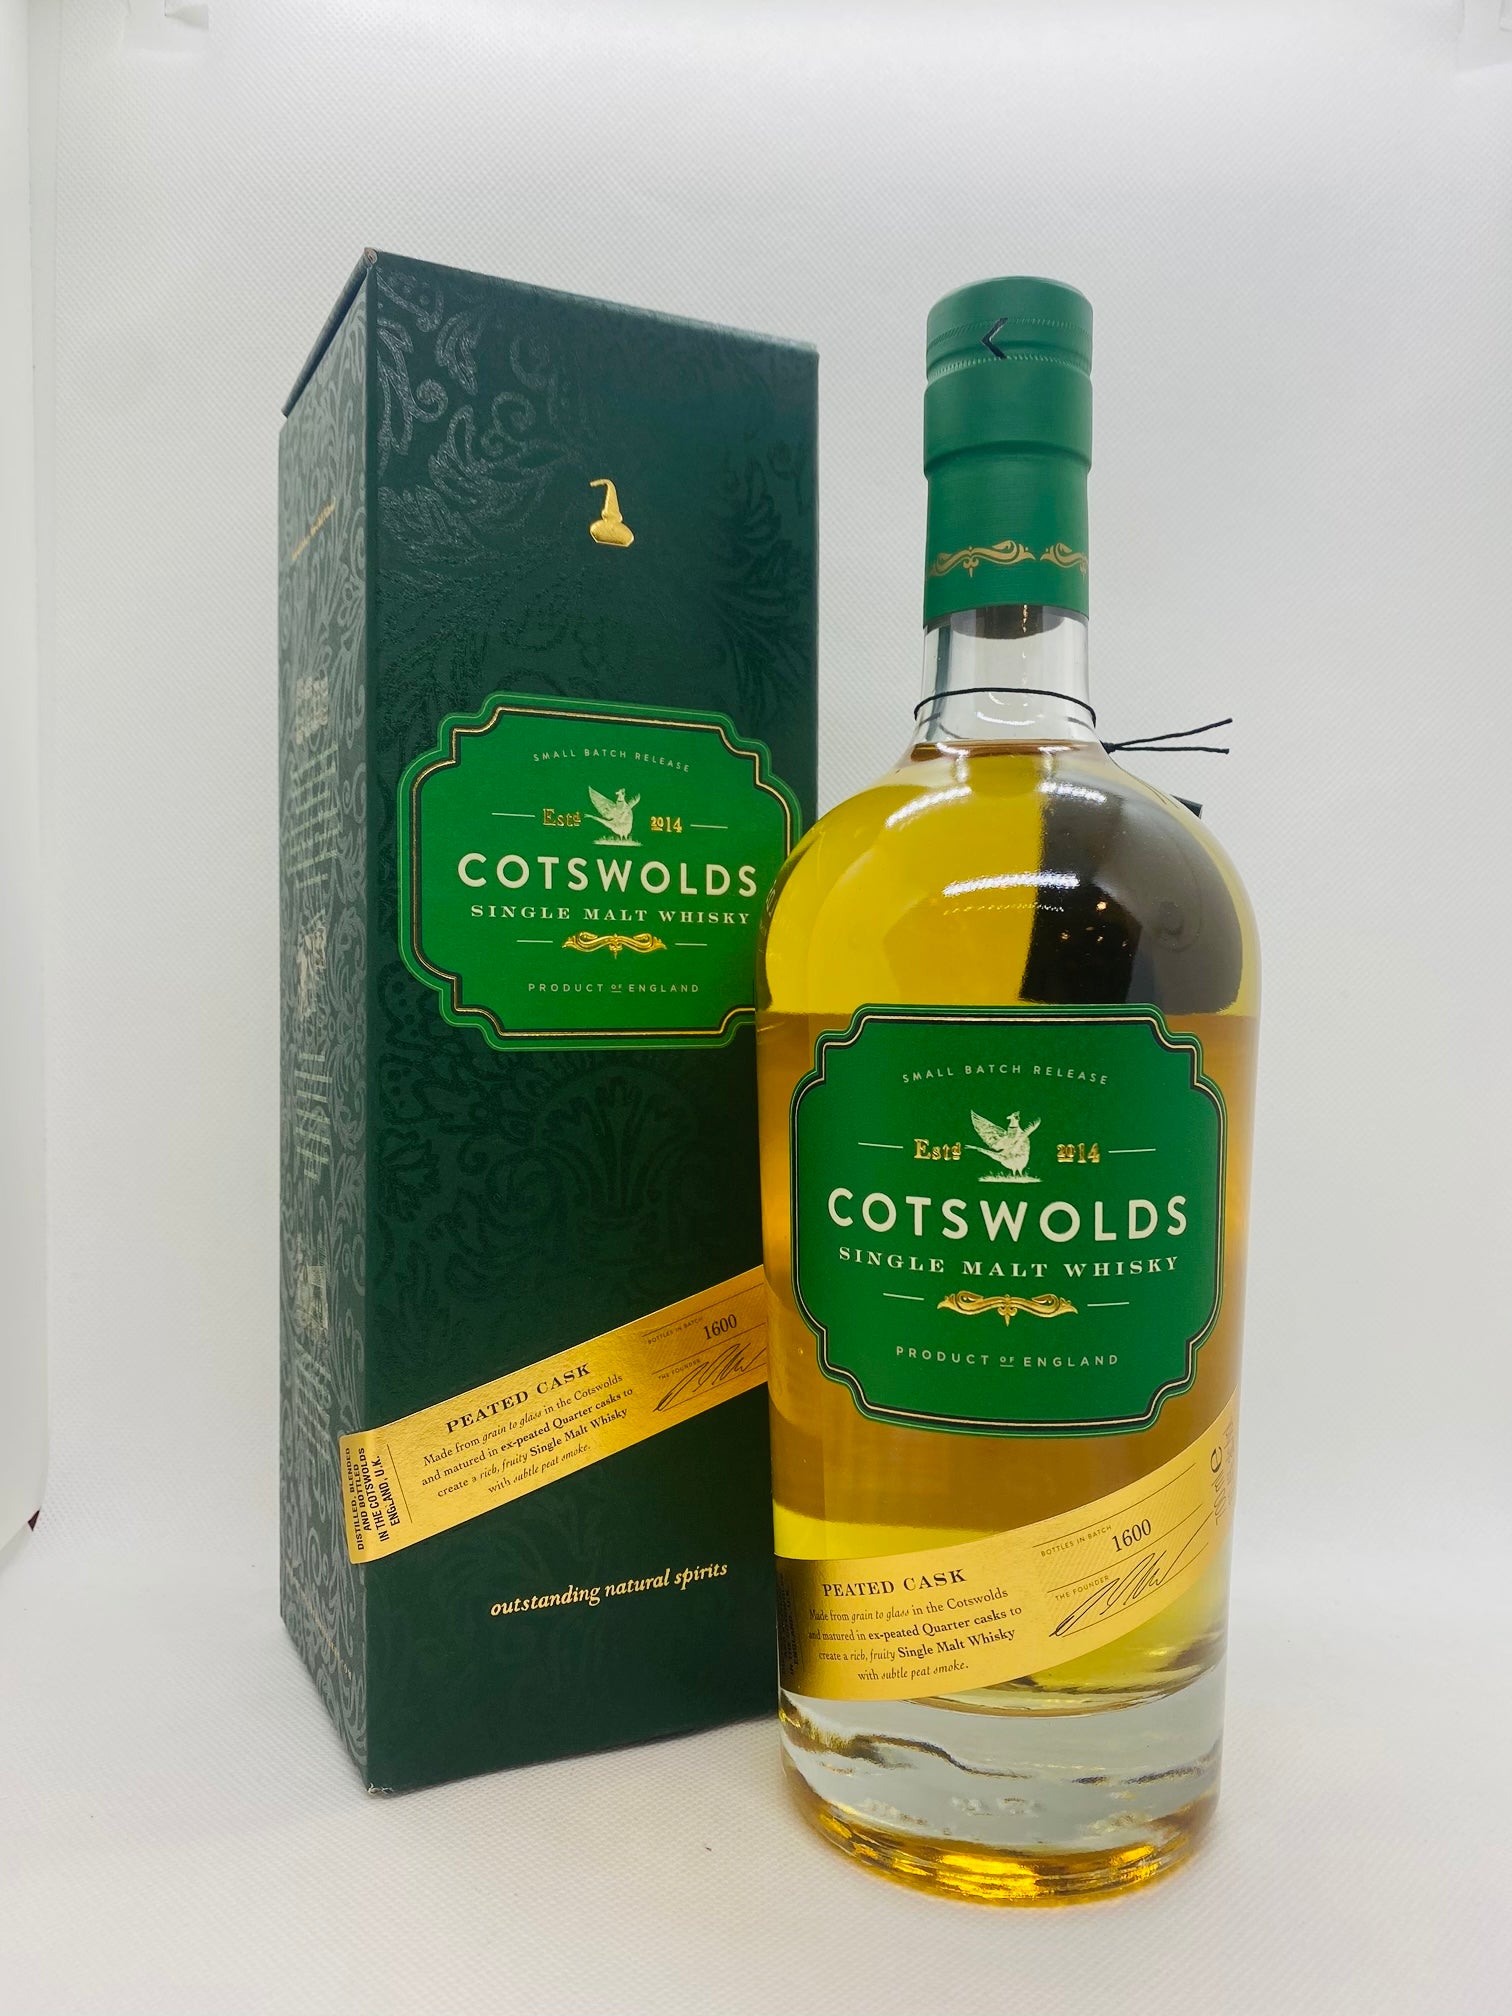 COTSWOLDS Peated Cask  59,6%, Single Malt Whisky, Angleterre